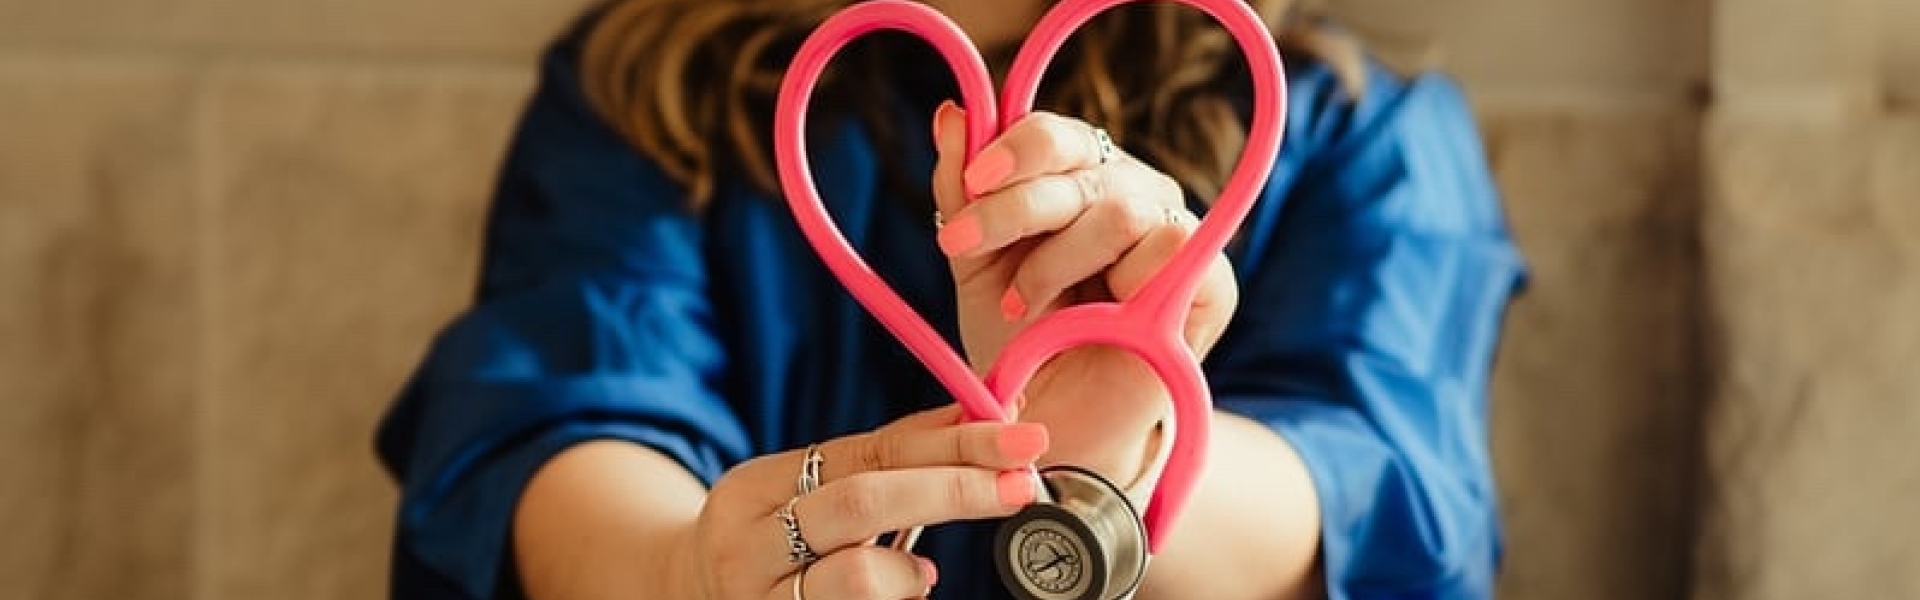 Healthcare worker and heart-shaped stethoscope